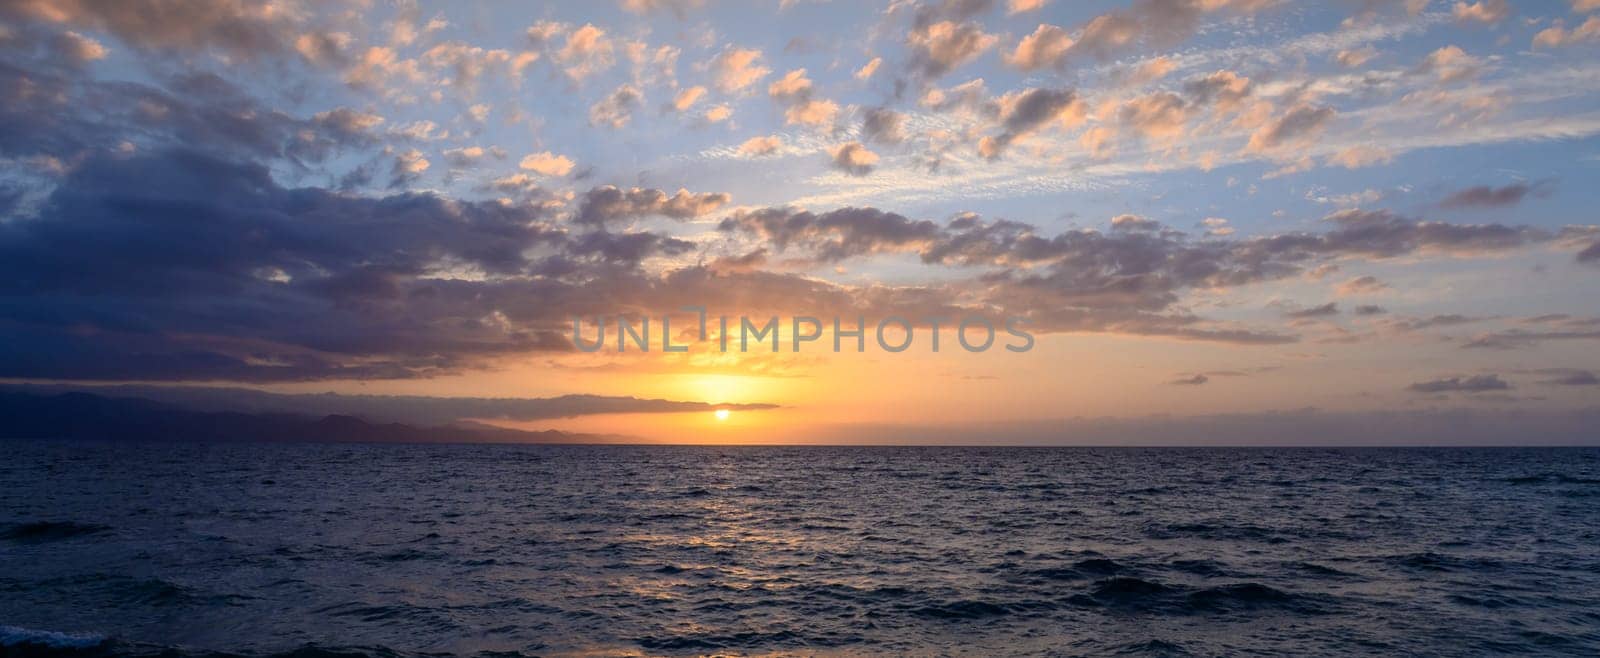 Epic sunset on the Mediterranean sea in Cyprus 2